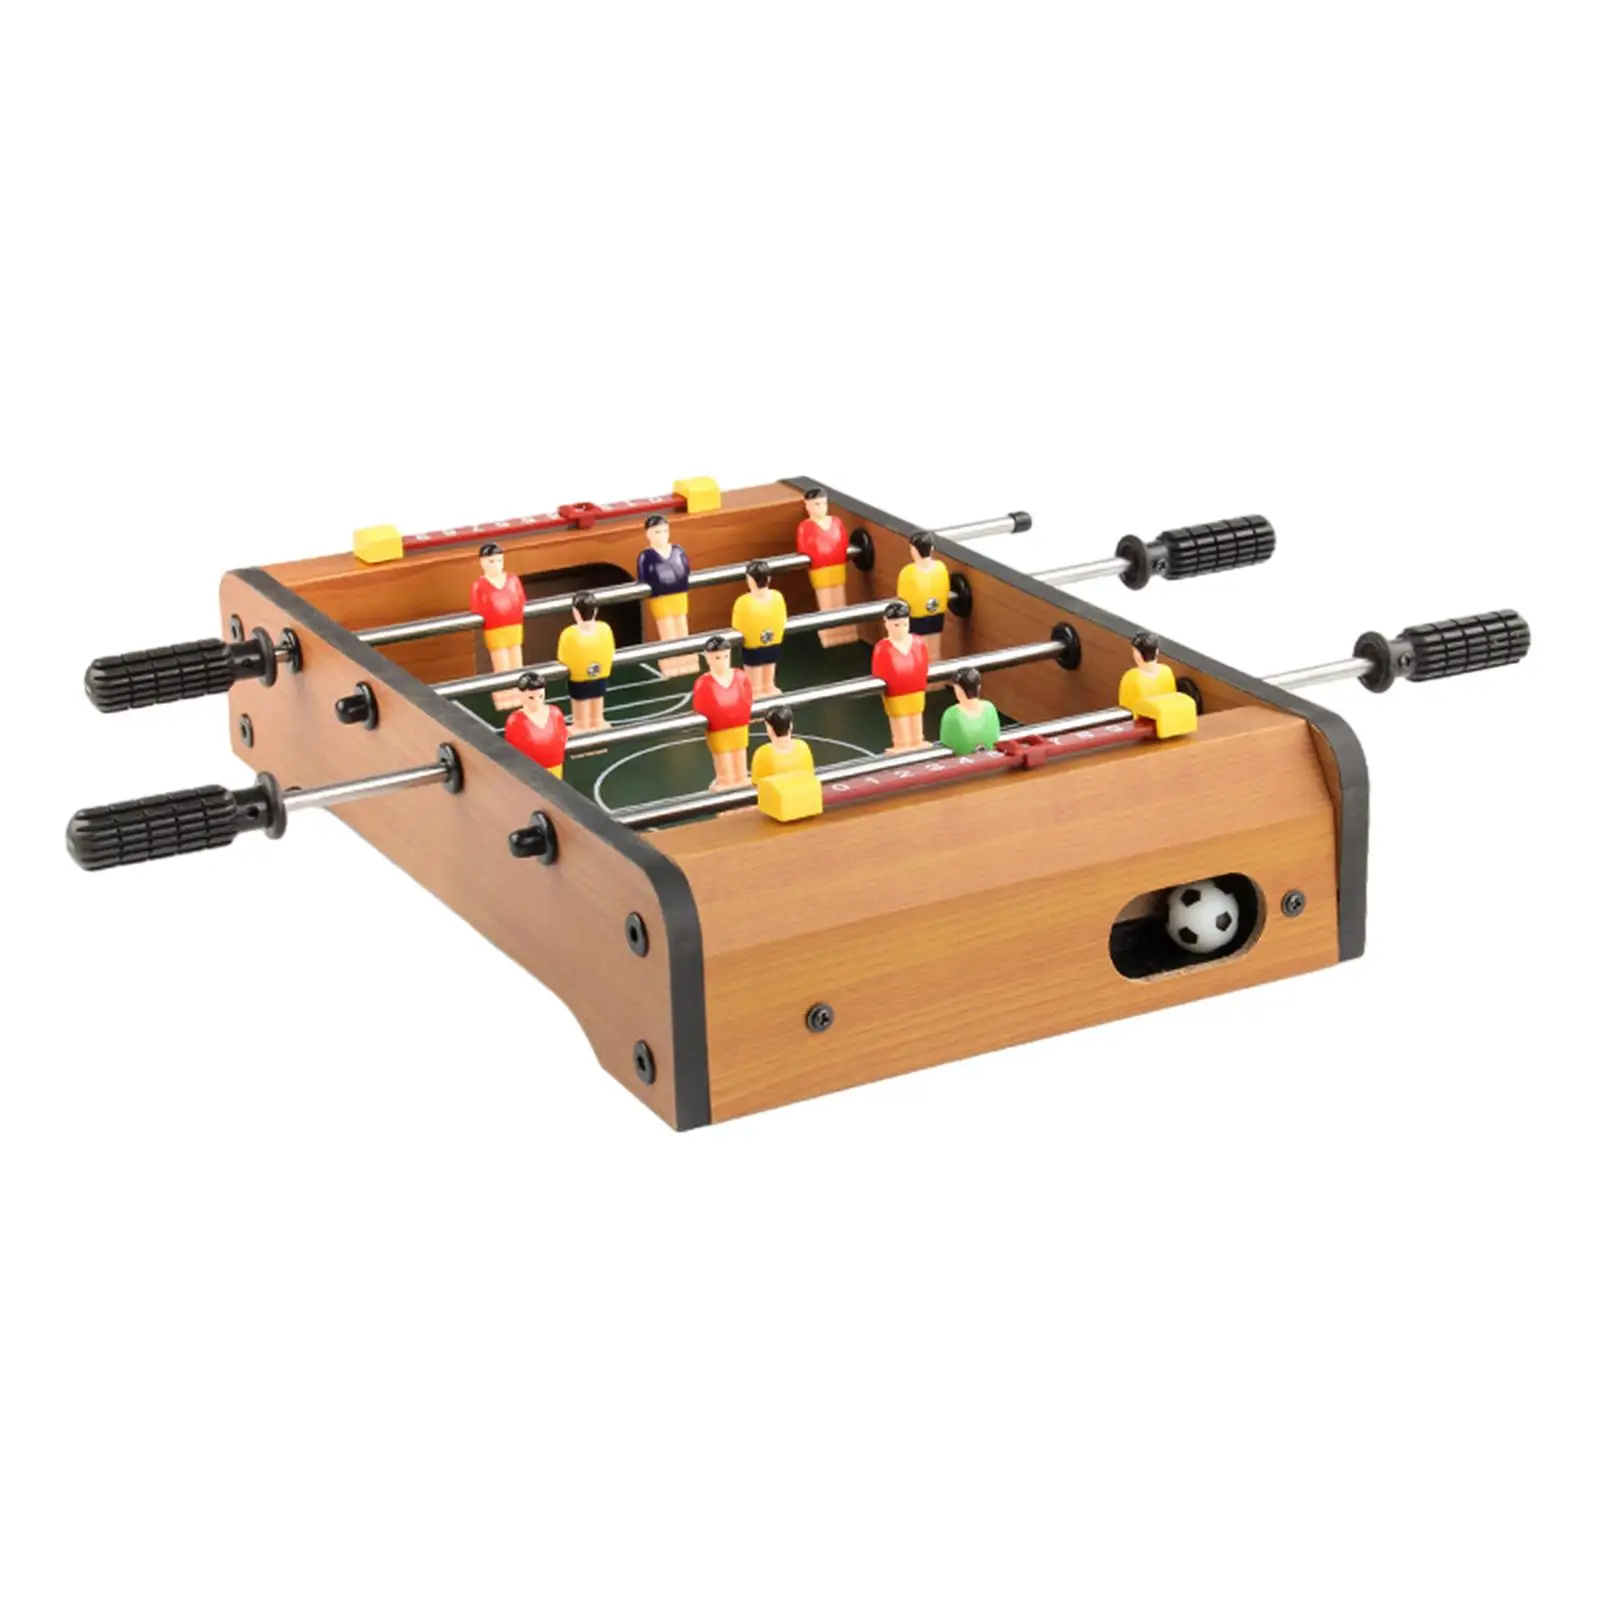 Portable Recreational Hand Soccer Tabletop Foosball Table for Indoor Family